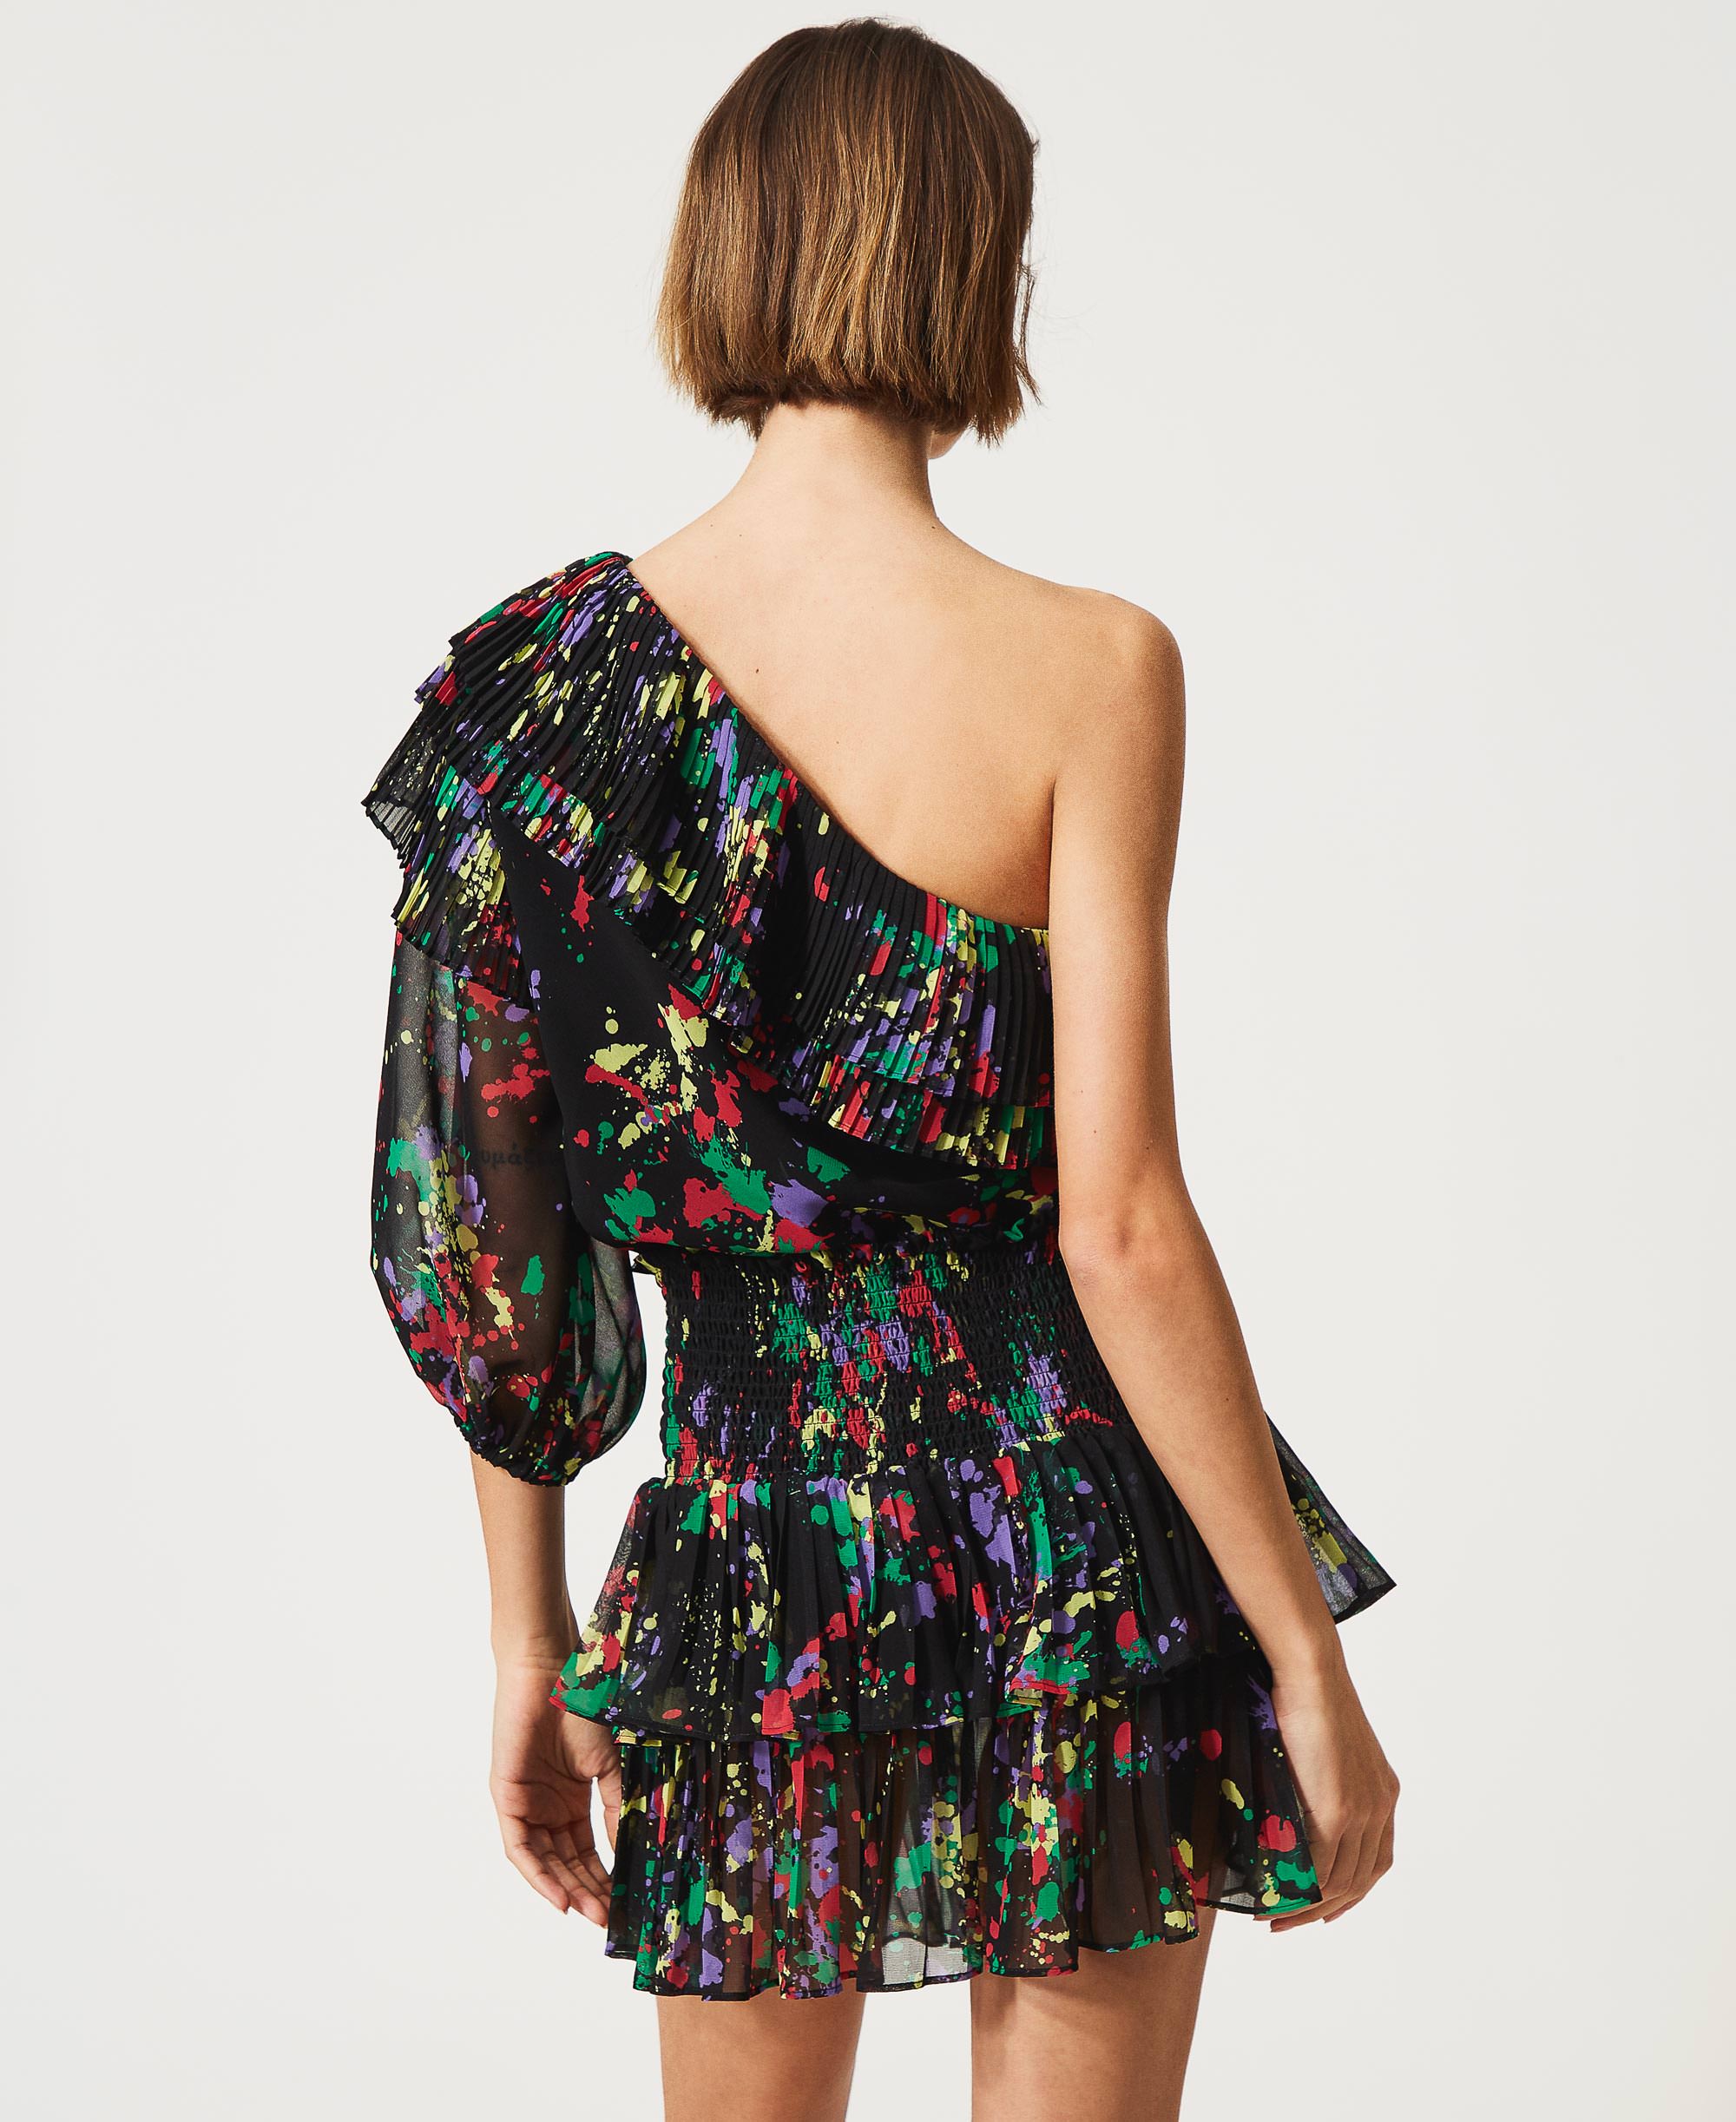 Rigel” printed georgette one-shoulder top, Actitude | TWINSET Milano